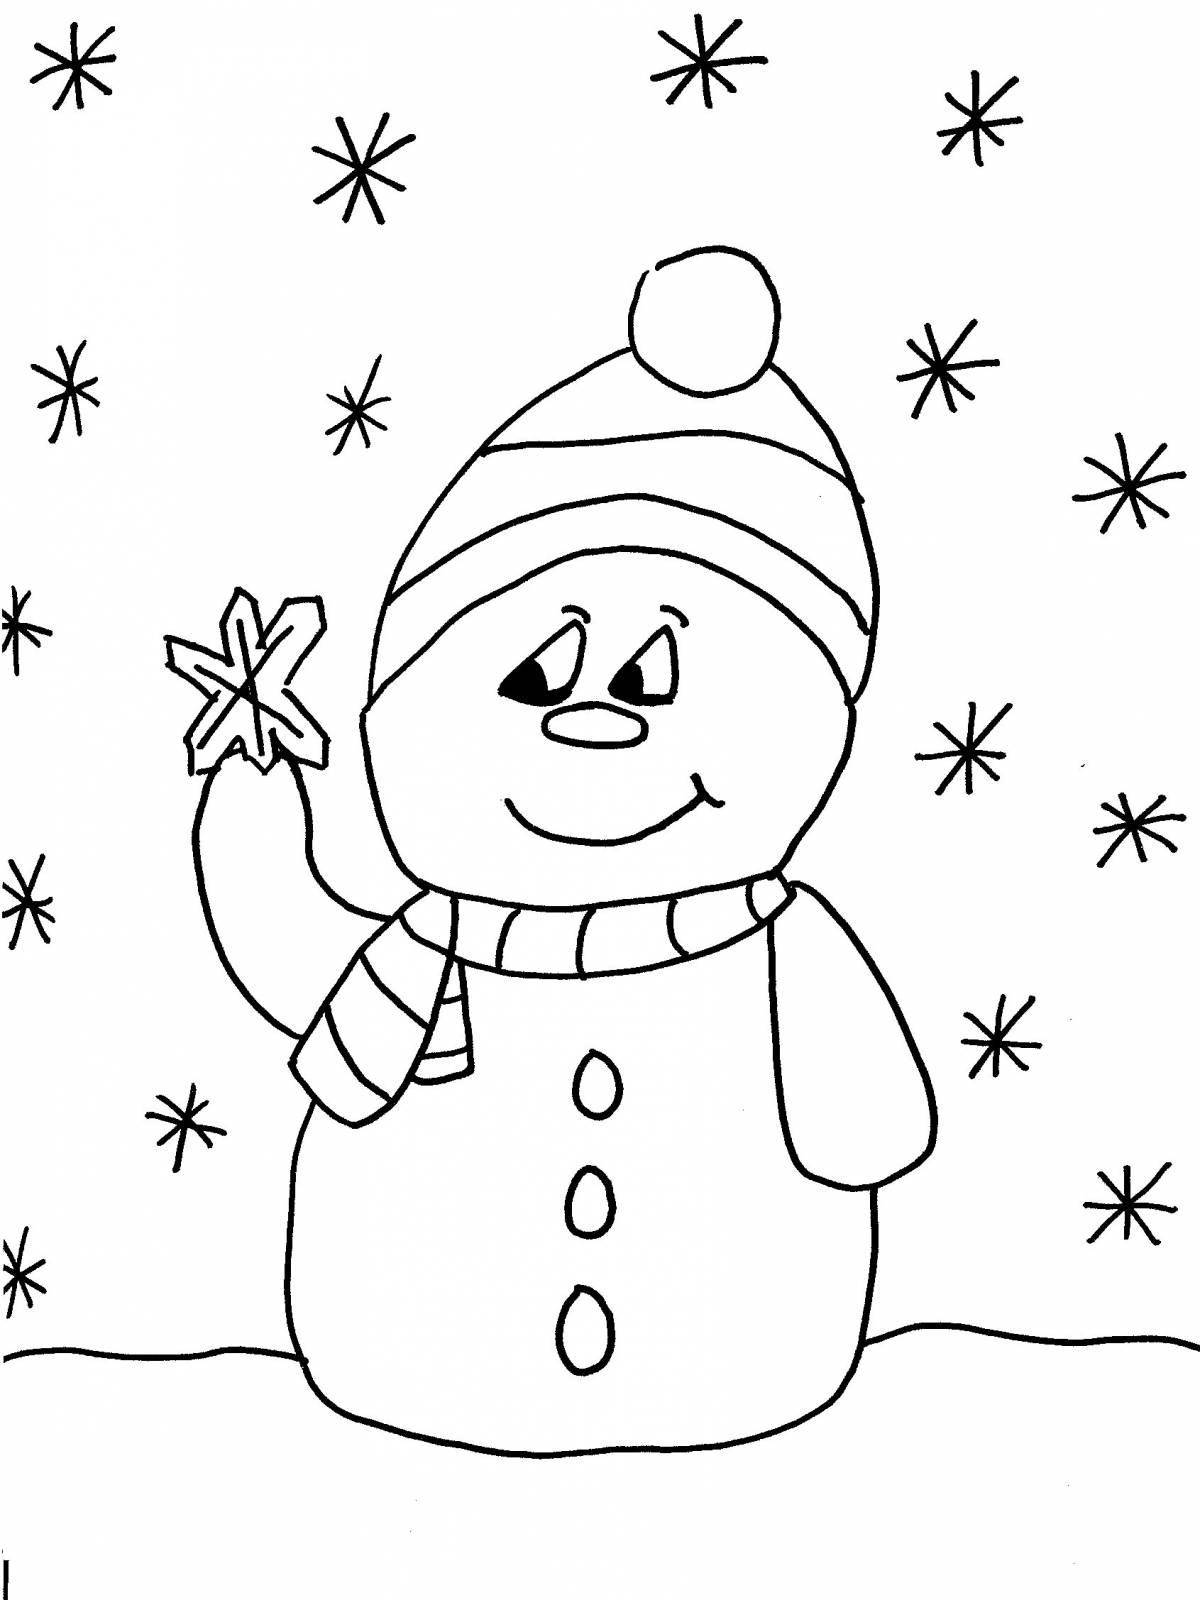 Luminous coloring pages for children aged 2 to 3